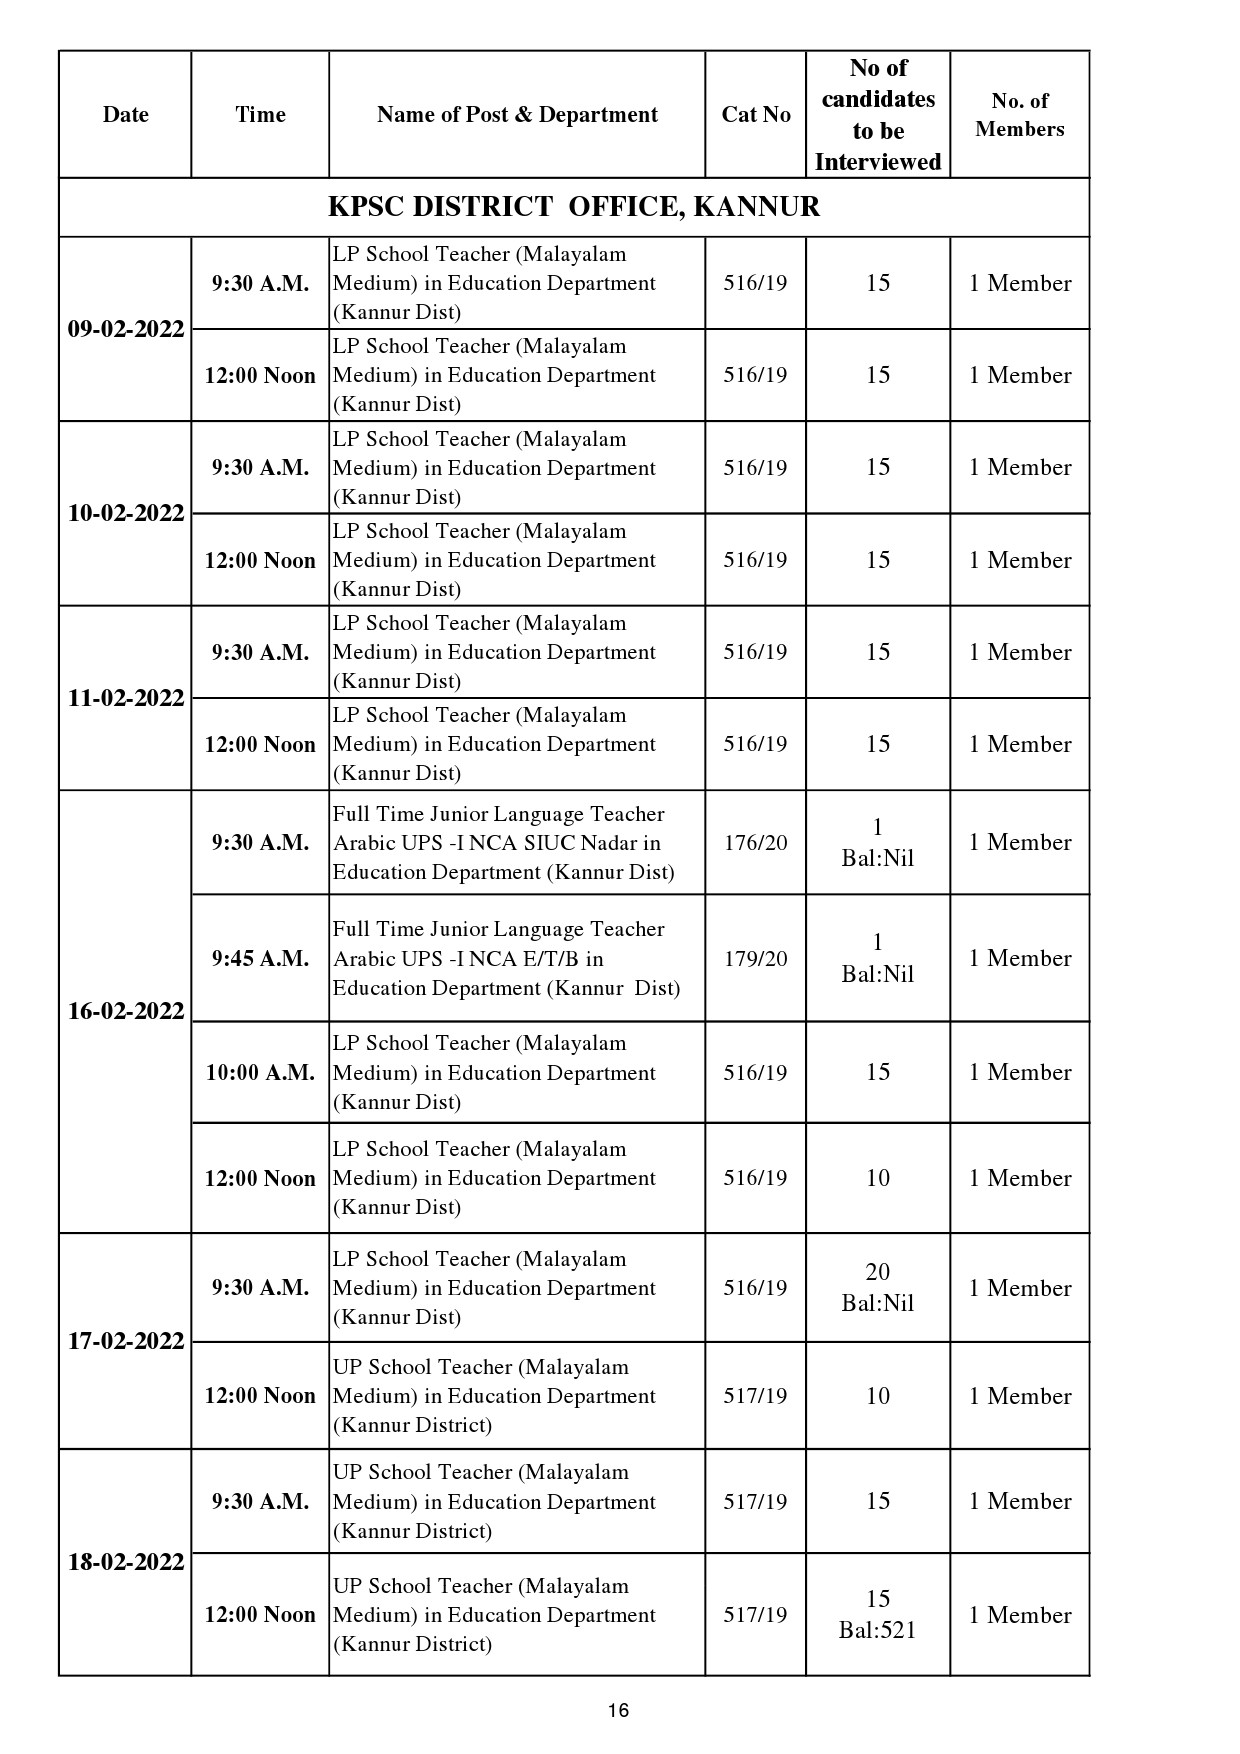 KPSC INTERVIEW PROGRAMME FOR THE MONTH OF FEBRUARY 2022 - Notification Image 16